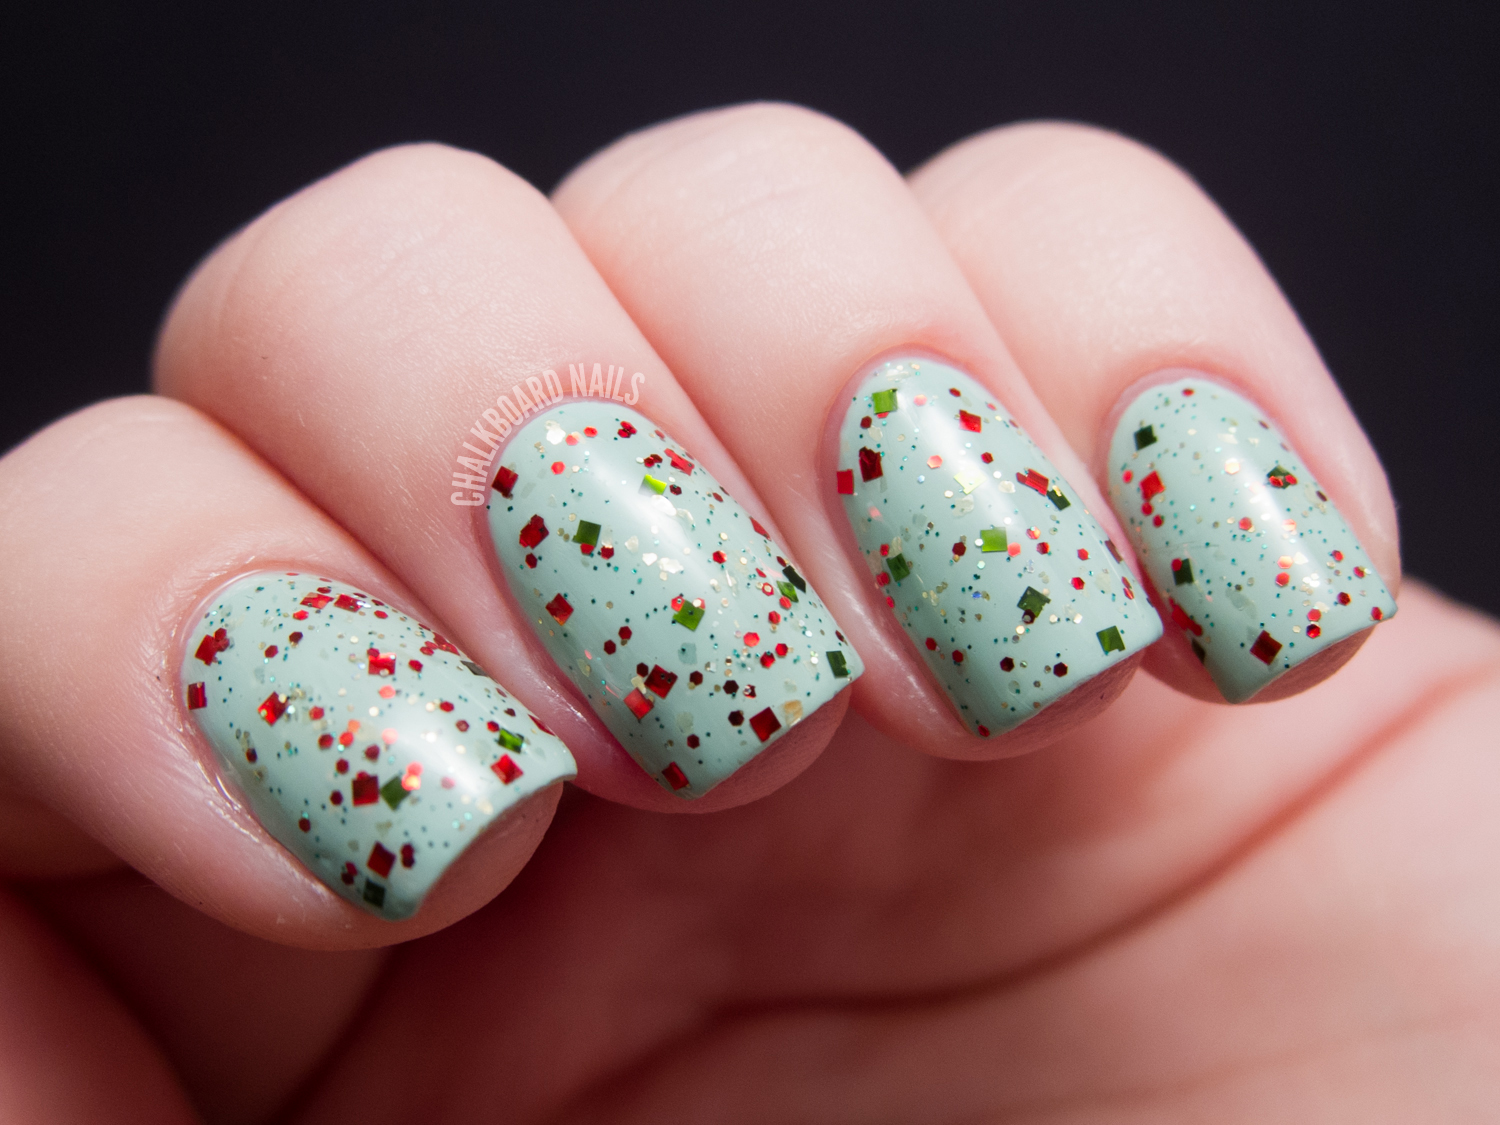 3. "Top Winter Nail Polish Shades for a Festive Look" - wide 10